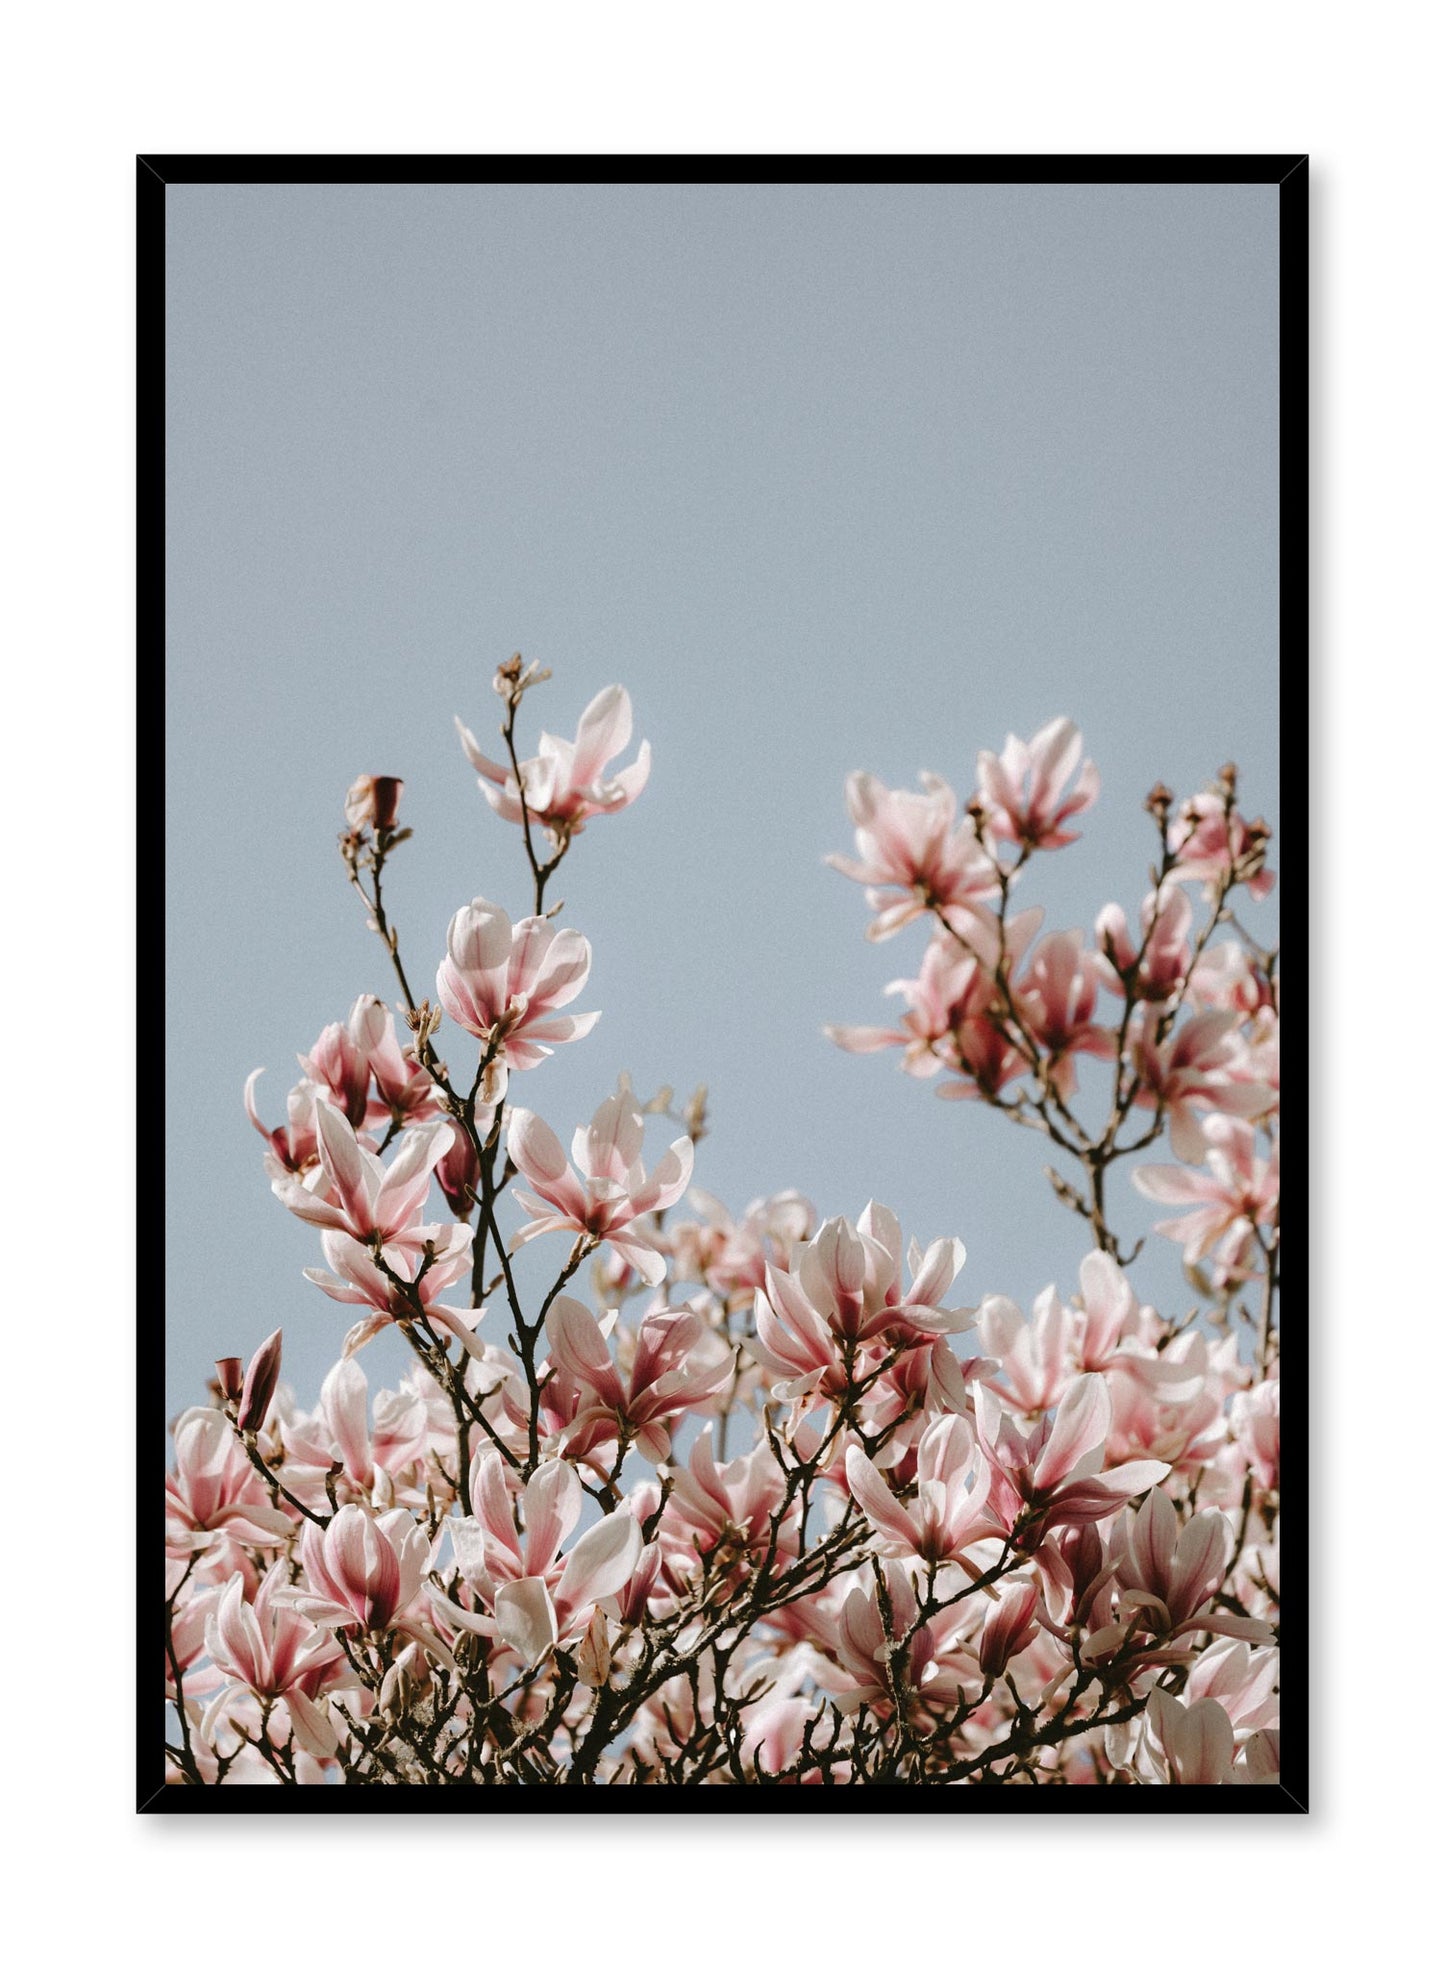 Minimalist design poster by Opposite Wall with Soaring Flowers floral photography